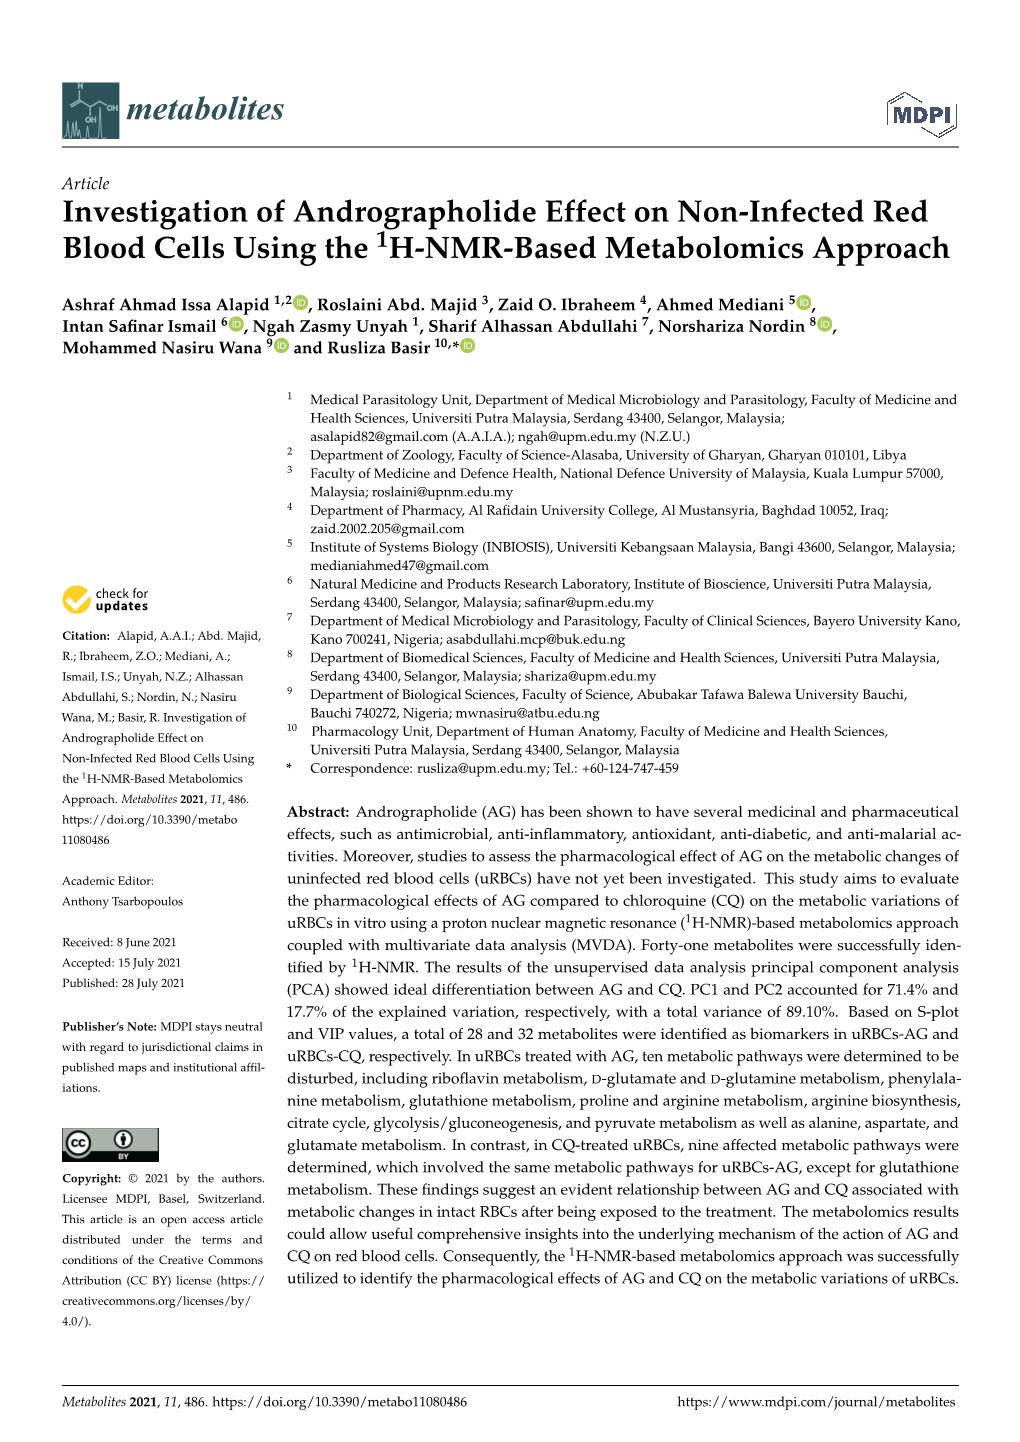 Investigation of Andrographolide Effect on Non-Infected Red Blood Cells Using the 1H-NMR-Based Metabolomics Approach